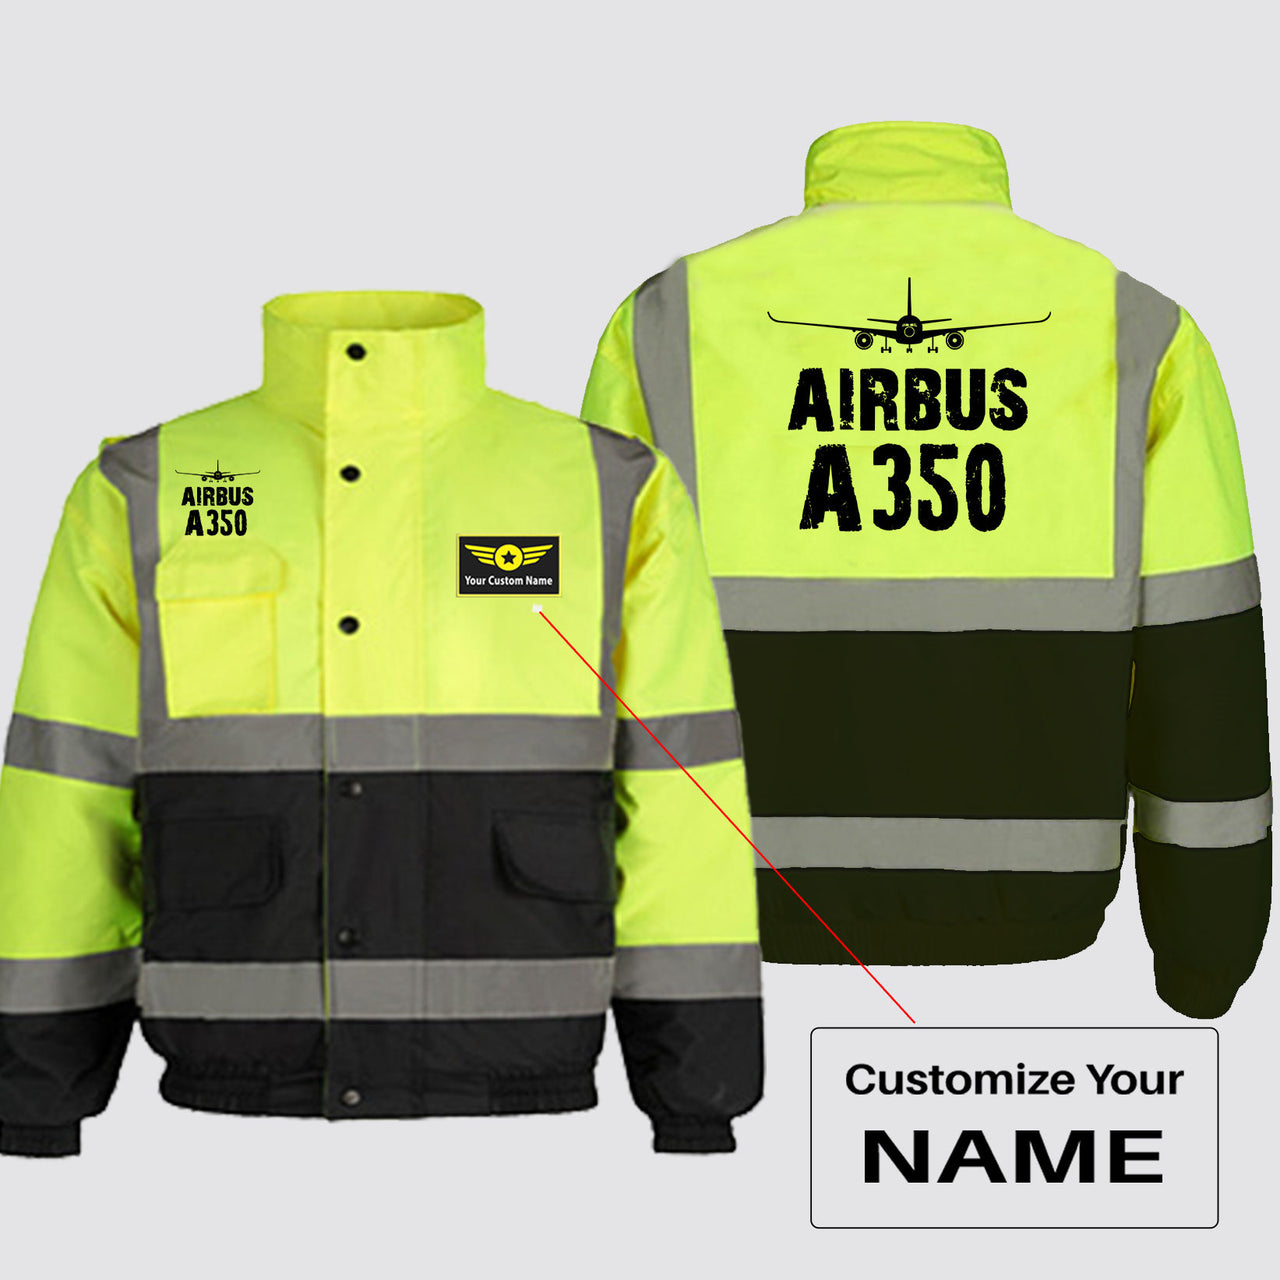 Airbus A350 & Plane Designed Reflective Winter Jackets